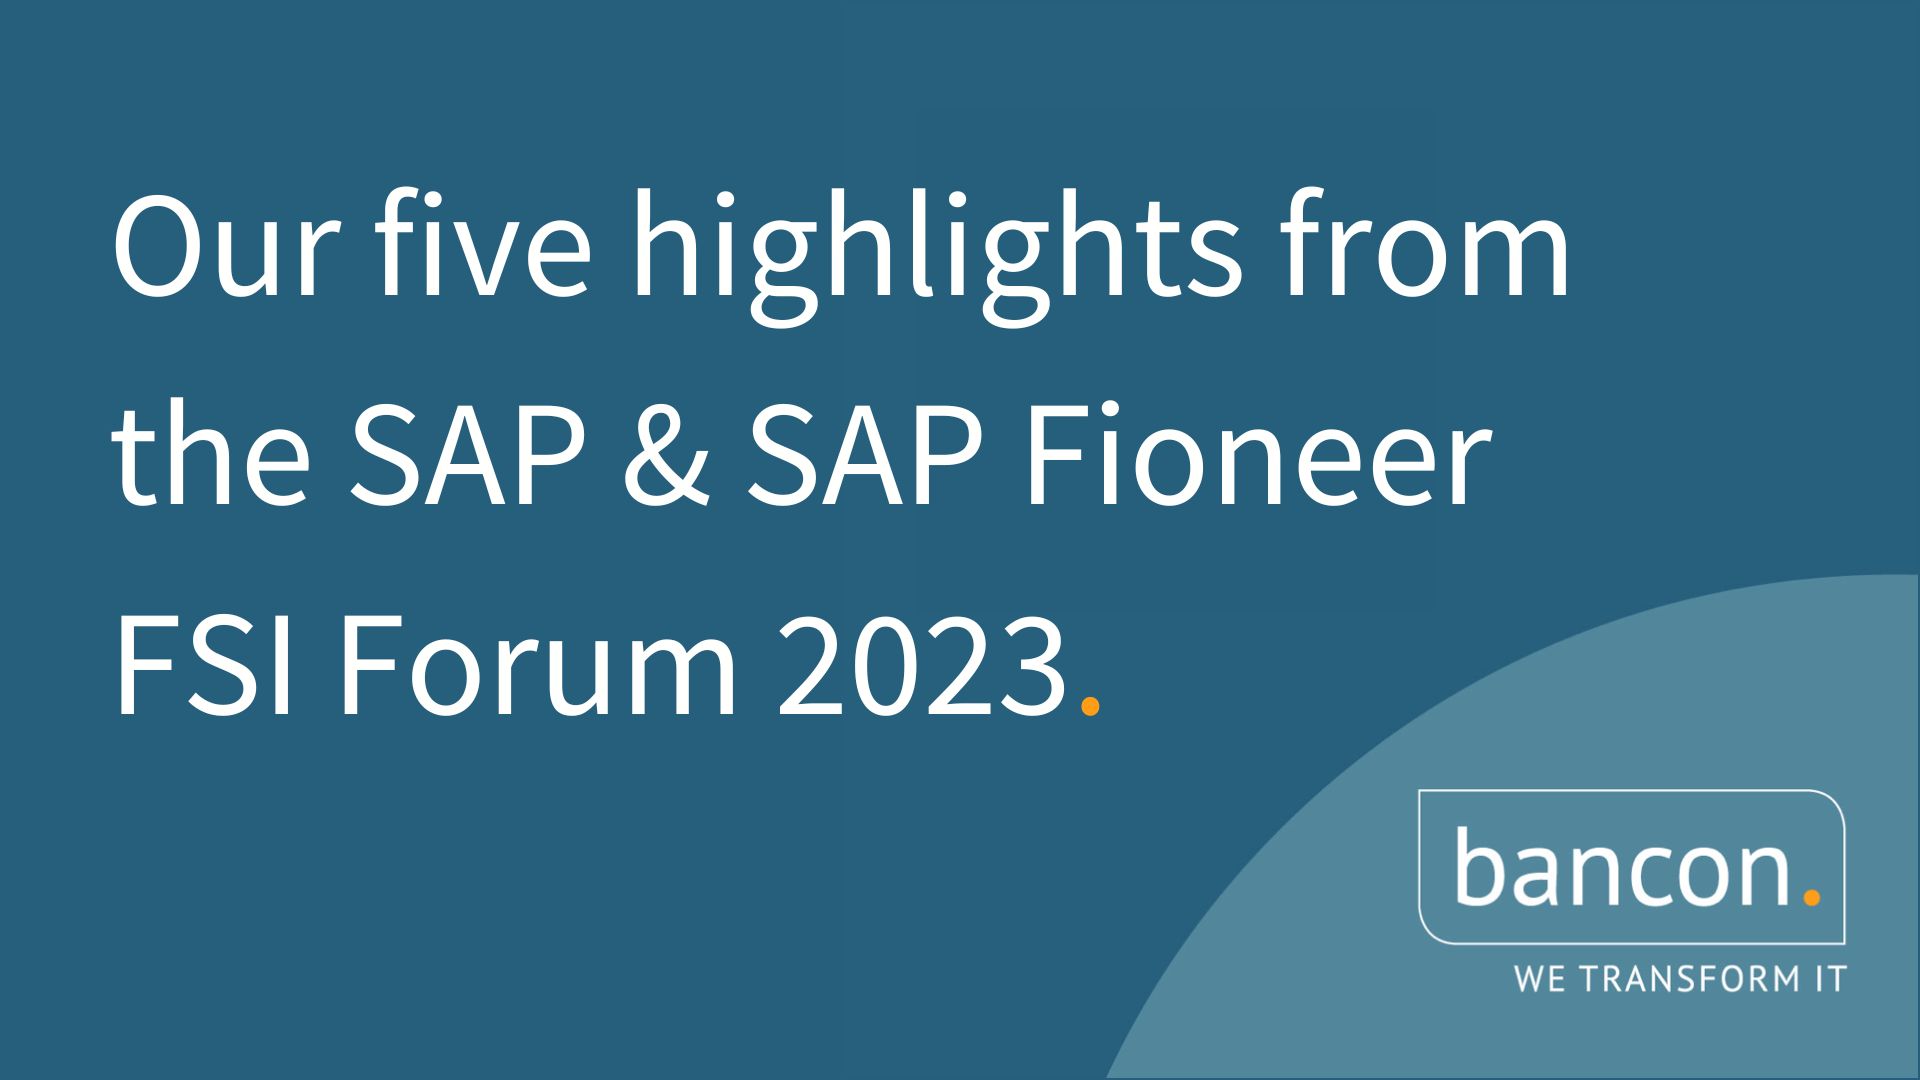 Our five highlights from the SAP & SAP Fioneer FSI Forum 2023